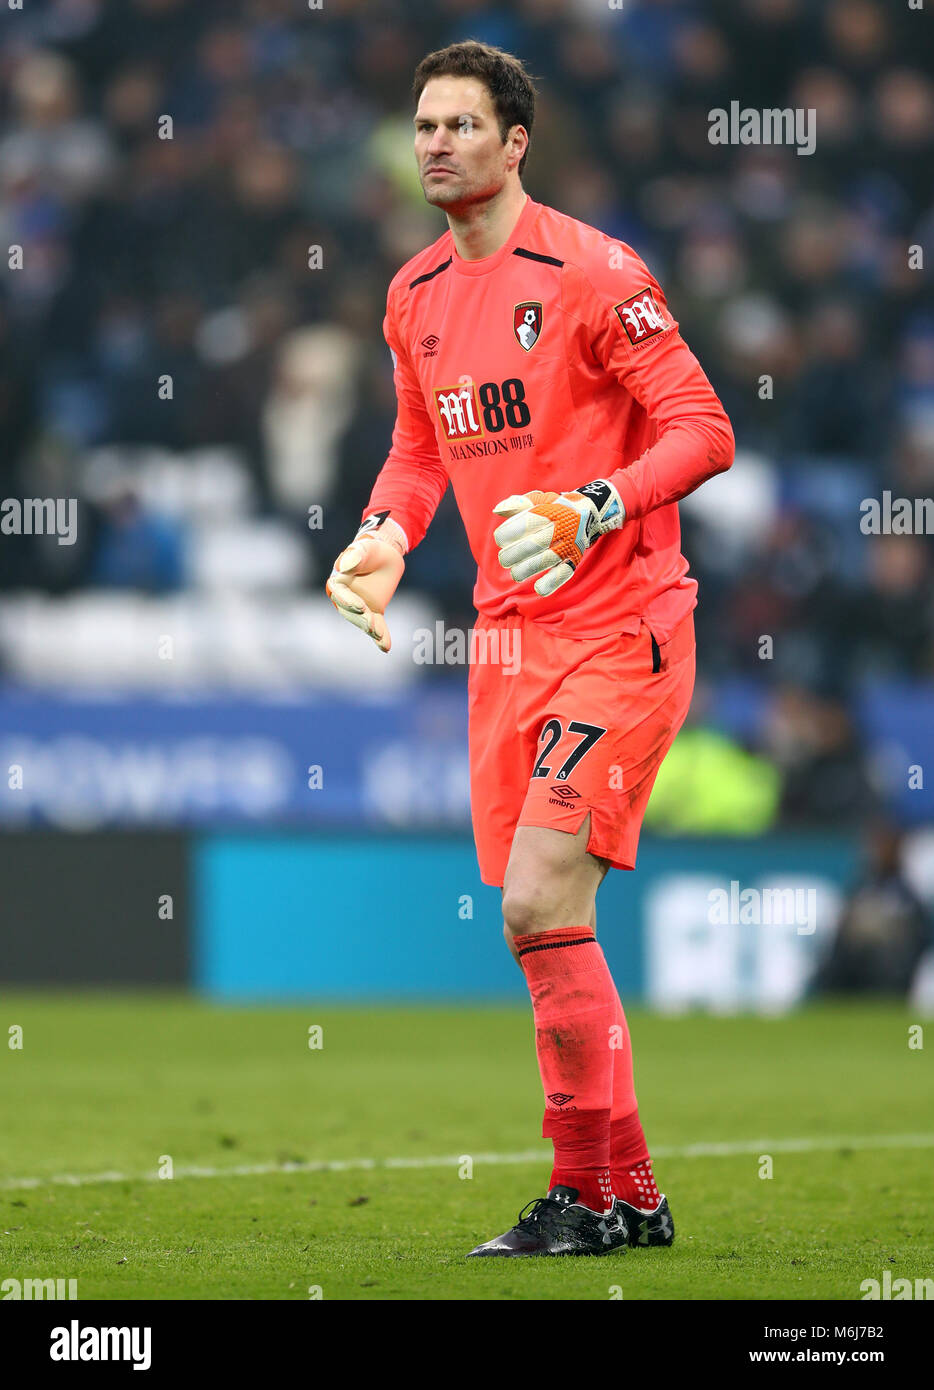 AFC Bournemouth goalkeeper Asmir Begovic during the Premier League match at the King Power Stadium, Leicester. PRESS ASSOCIATION Photo. Picture date: Saturday March 3, 2018. See PA story SOCCER Leicester. Photo credit should read: Tim Goode/PA Wire. RESTRICTIONS: No use with unauthorised audio, video, data, fixture lists, club/league logos or 'live' services. Online in-match use limited to 75 images, no video emulation. No use in betting, games or single club/league/player publications. Stock Photo